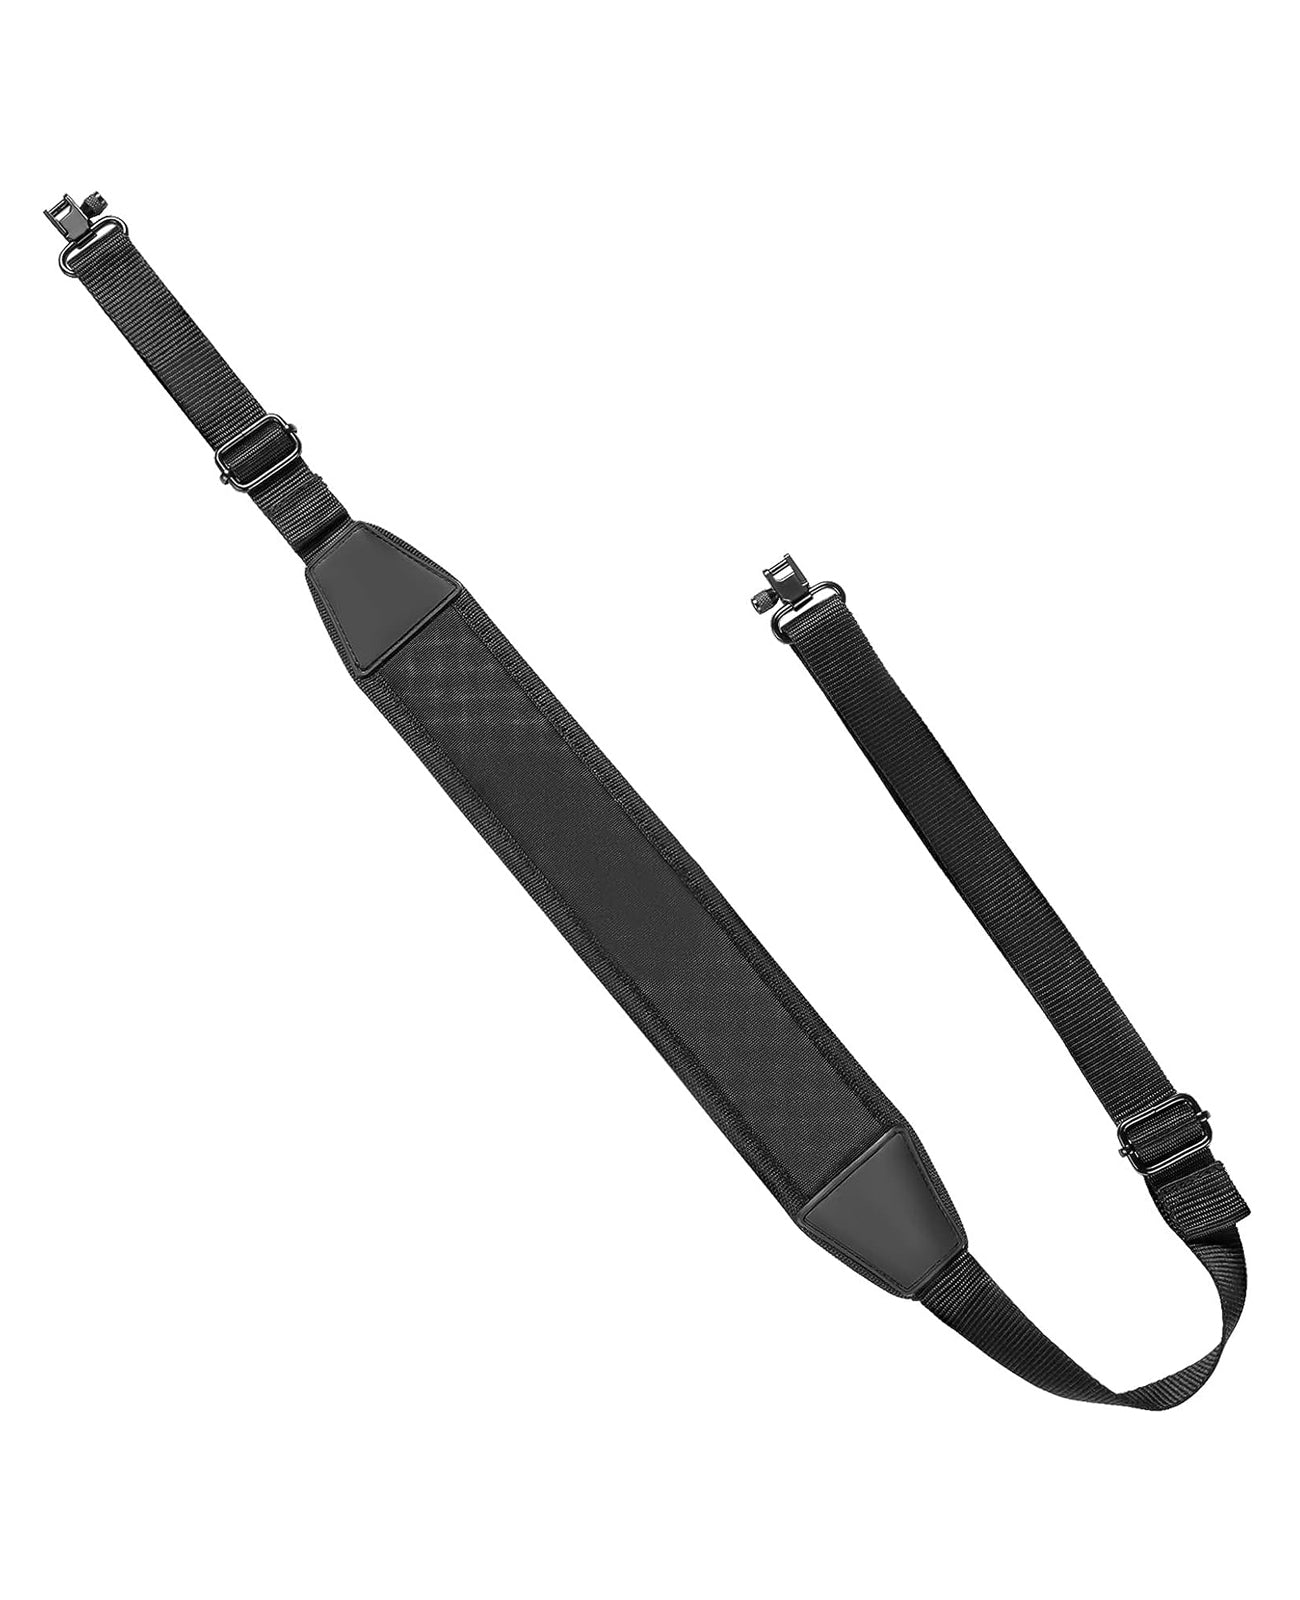 full black Enduring 2 point gun sling with adjustable features